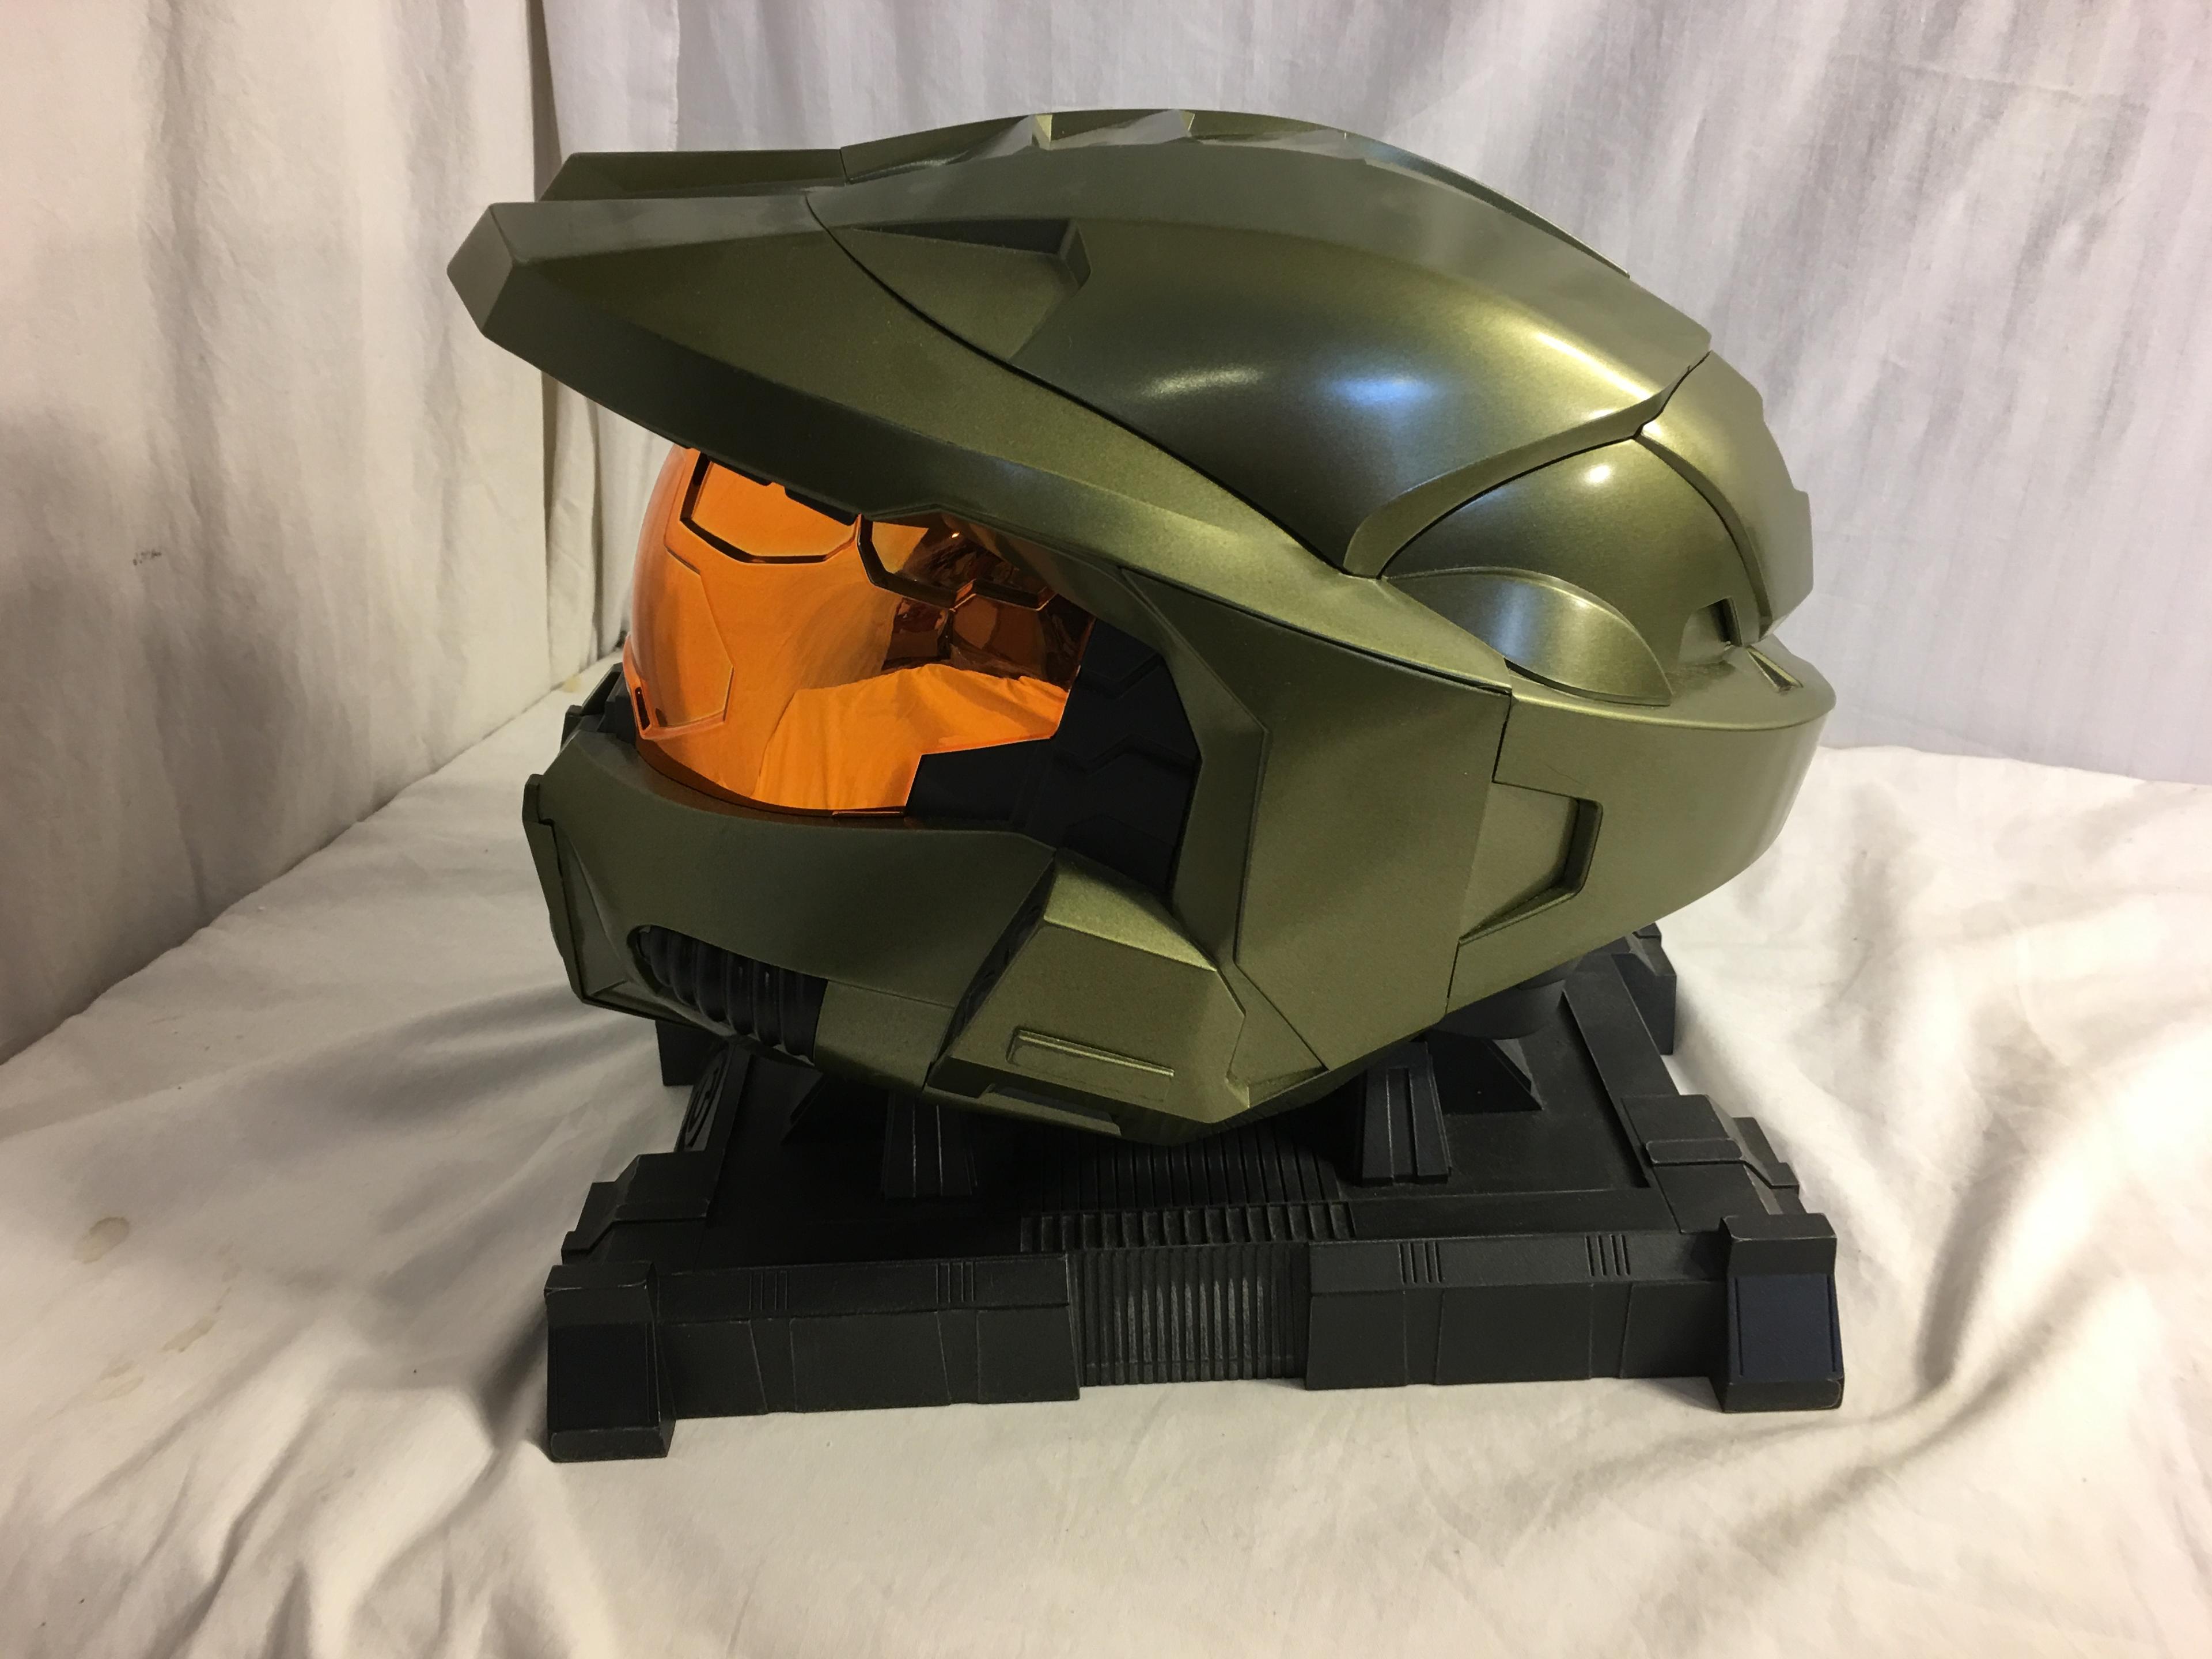 Collector Halo 3 Legendary Edition Master Chief Helmet  No Game Size: 11" by 11"